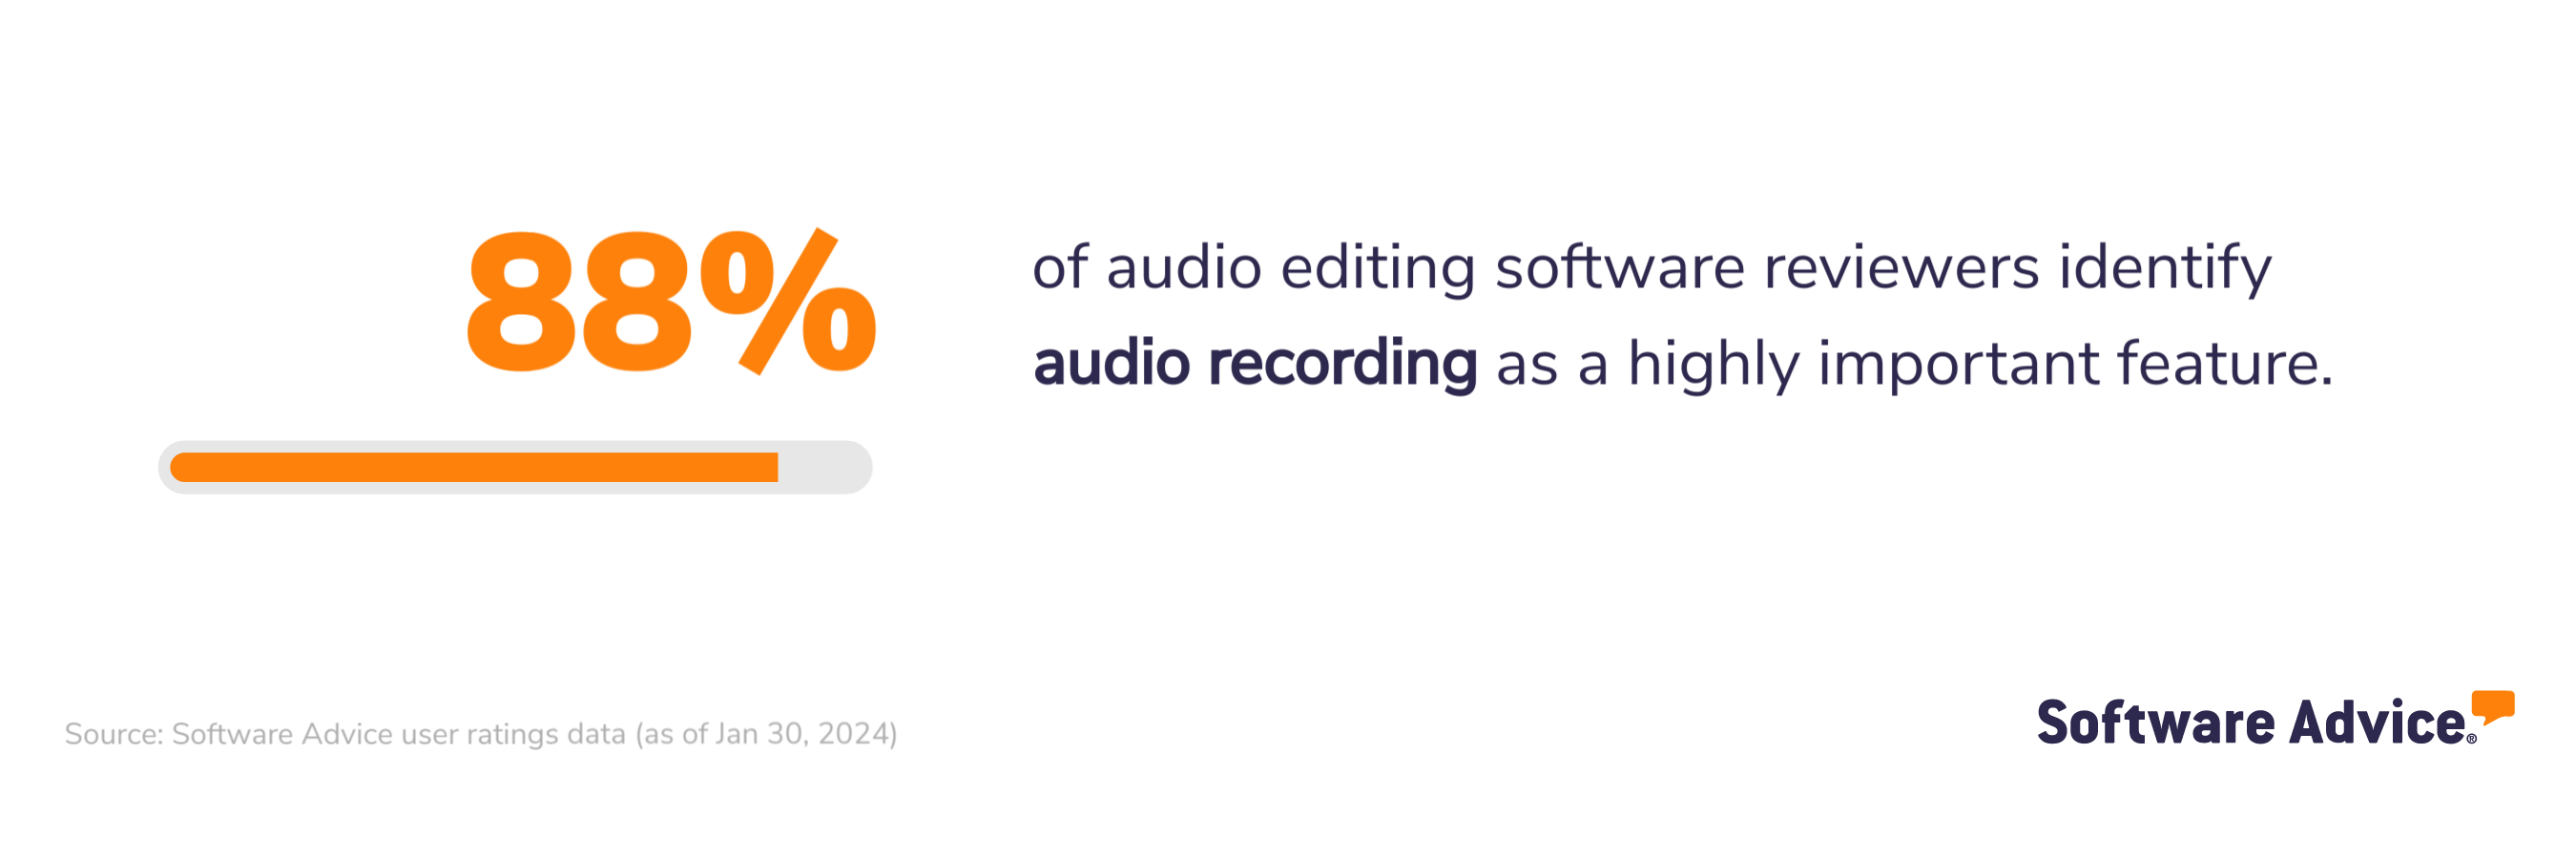 88% of audio editing software reviewers identify audio recording as a highly important feature